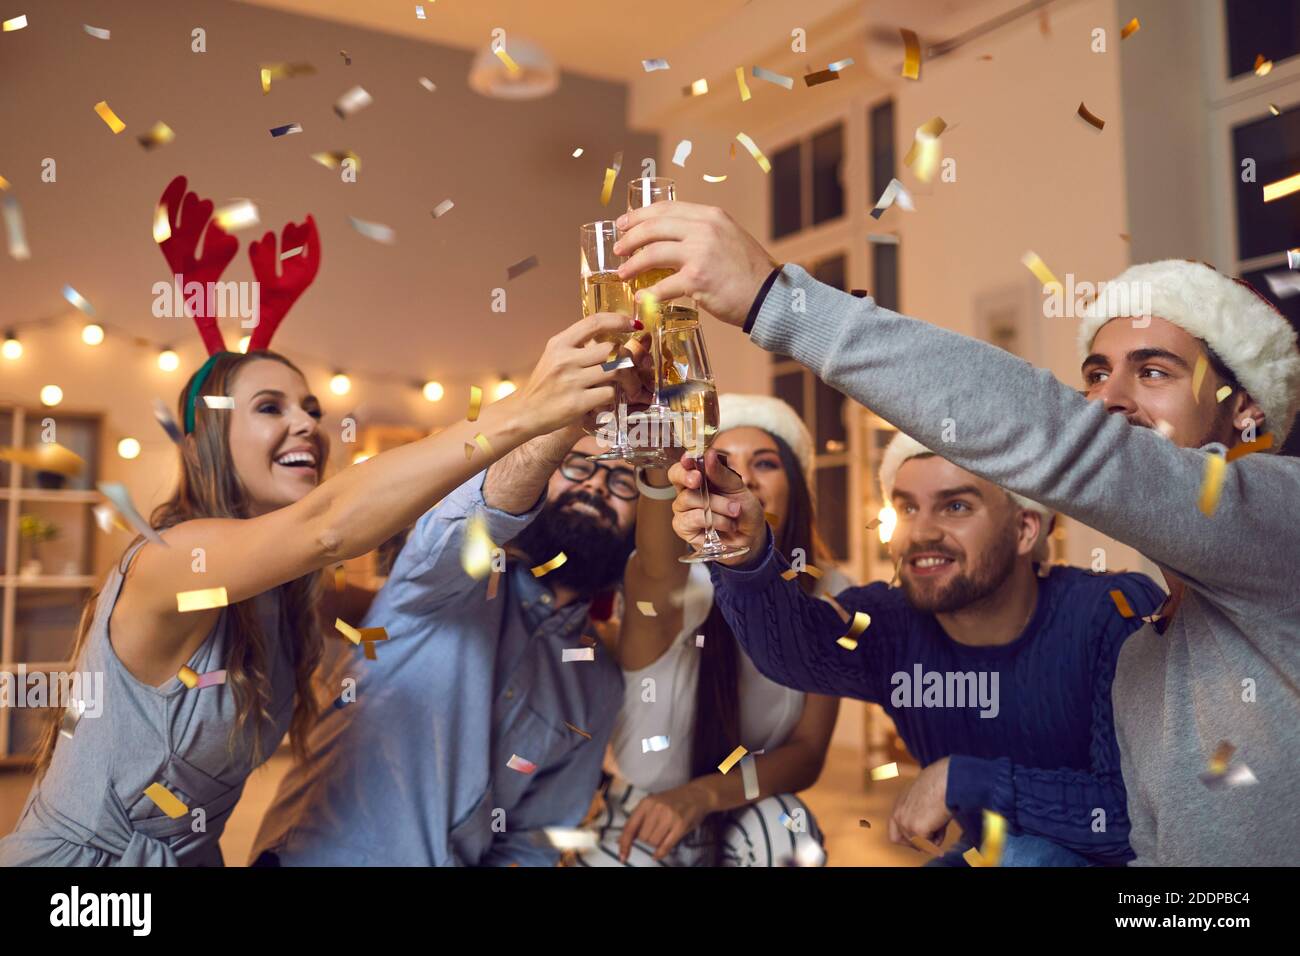 Group of young positive friends in decorative hats celebrating Christmas with champagne during party Stock Photo